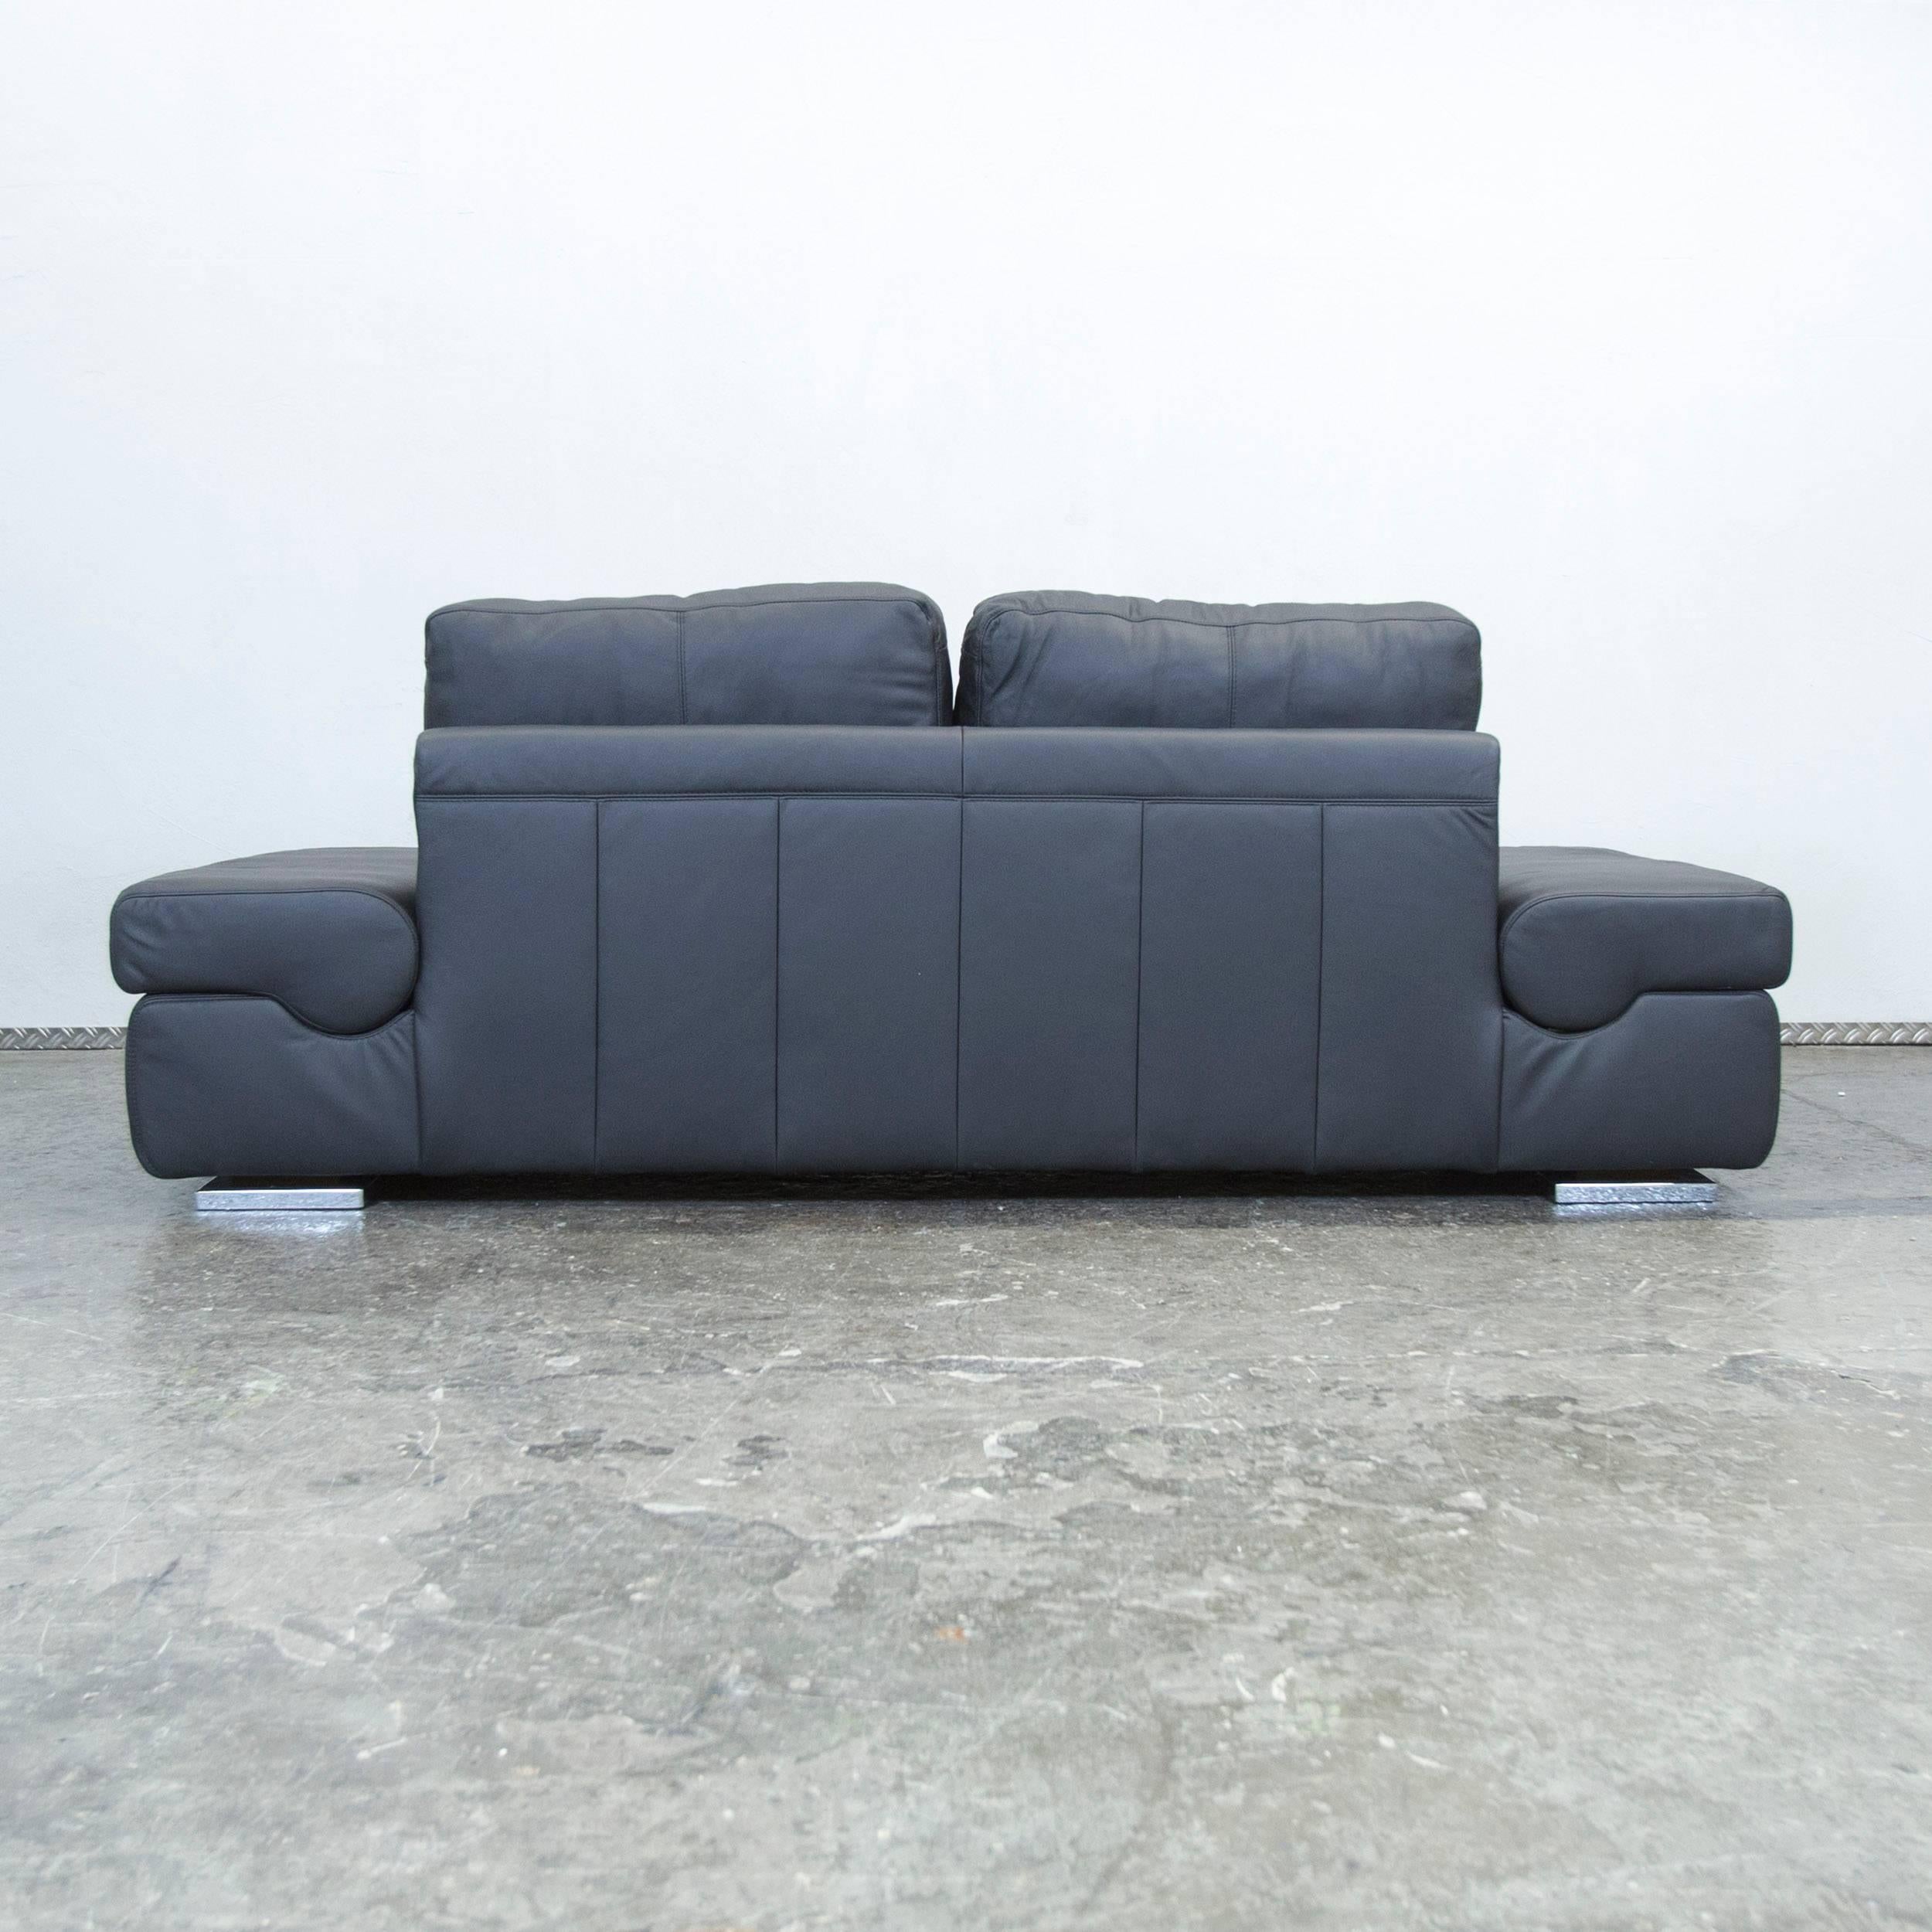 Musterring Linea Designer Leather Sofa Black Three-Seat Couch Function 1